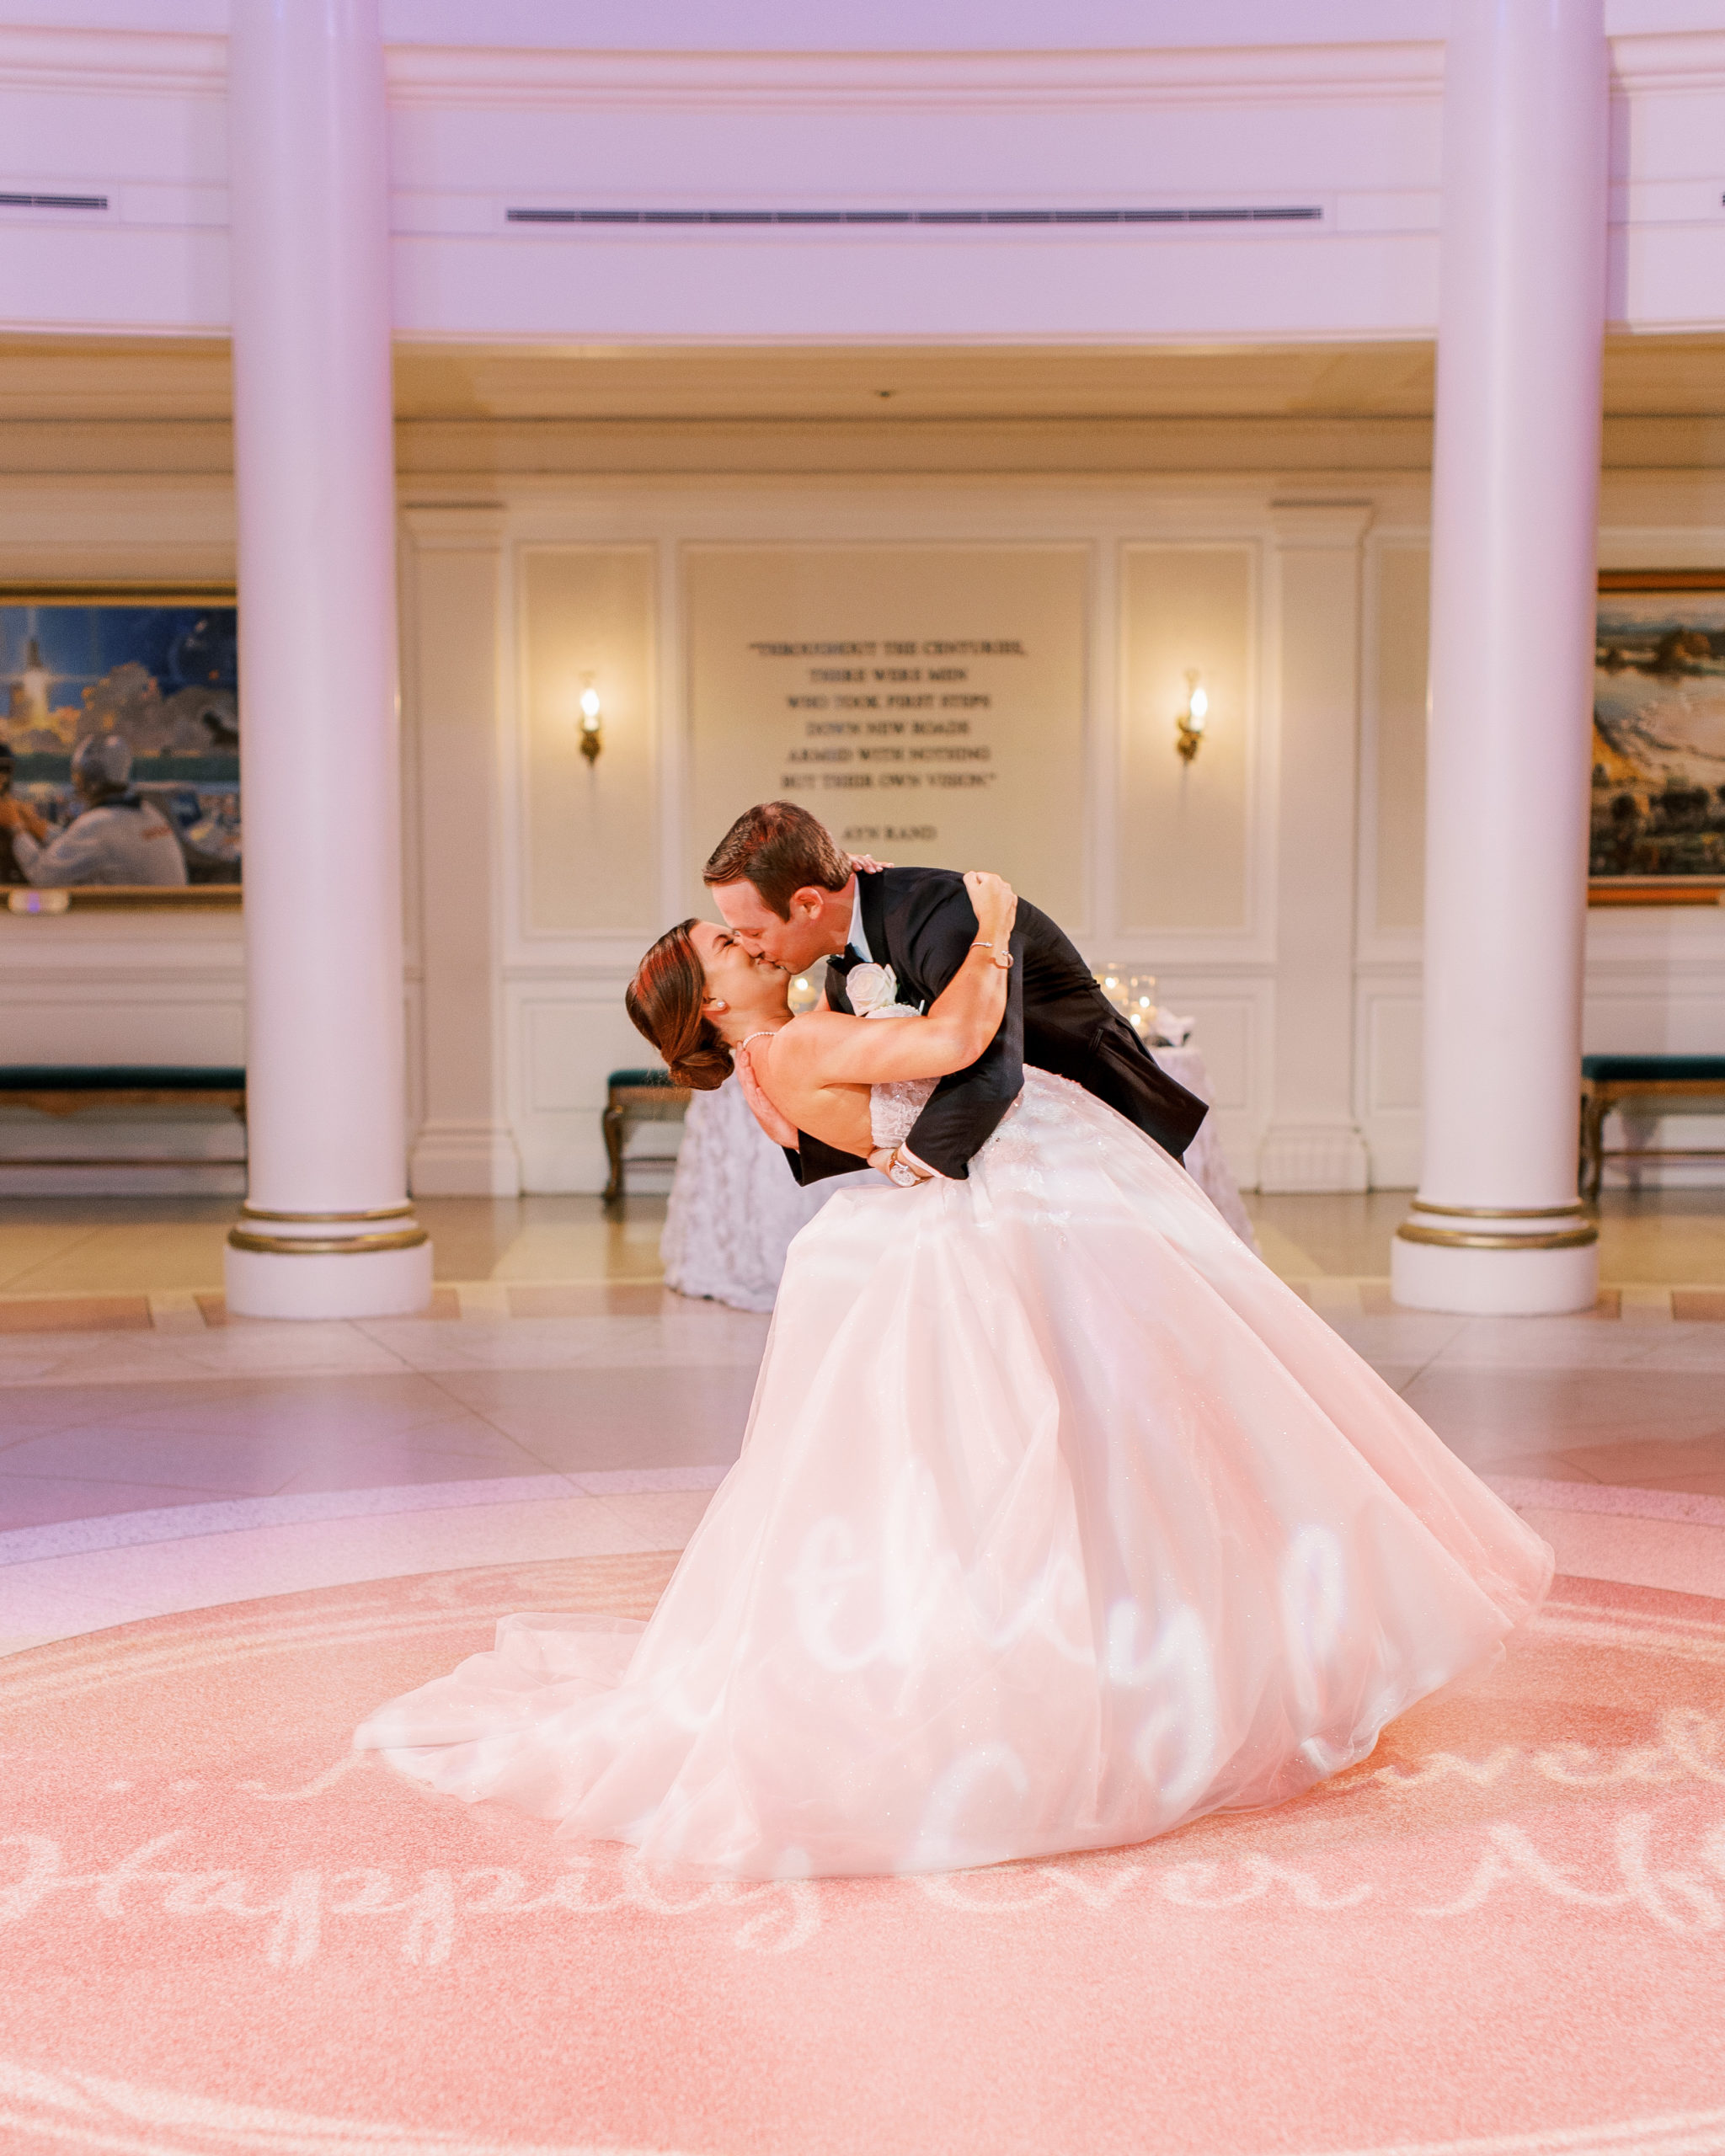 Bride and groom kiss on dance floor at wedding reception for a Romantic and Timeless Grand Floridian Wedding 